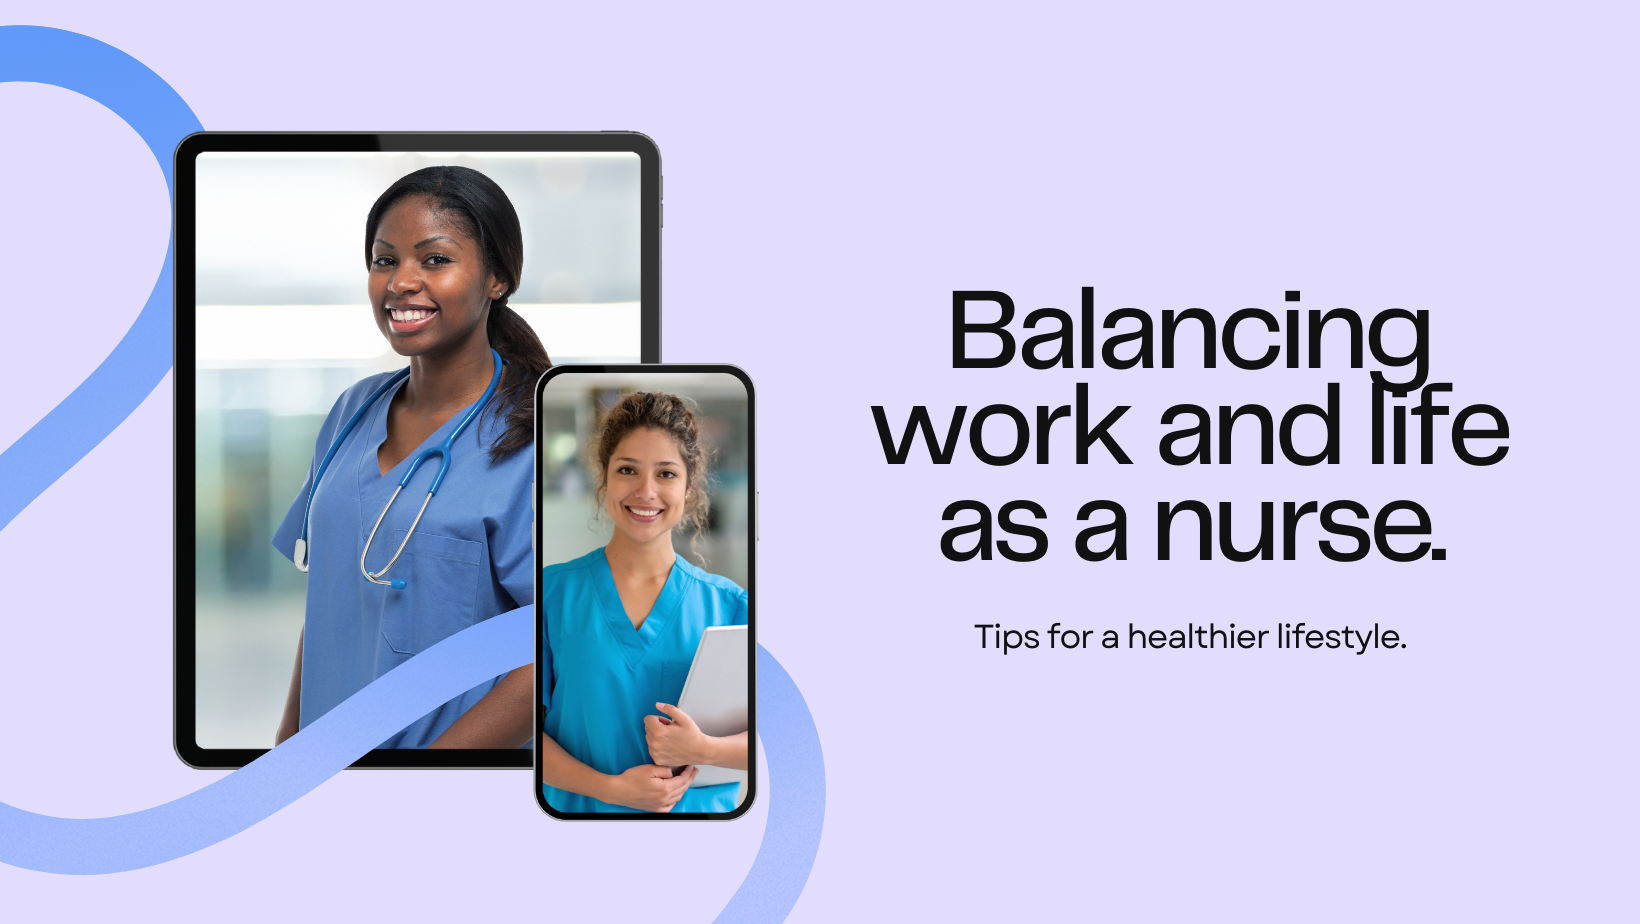 A nurse balancing work and life, showing the importance of achieving work-life balance and embracing leadership opportunities